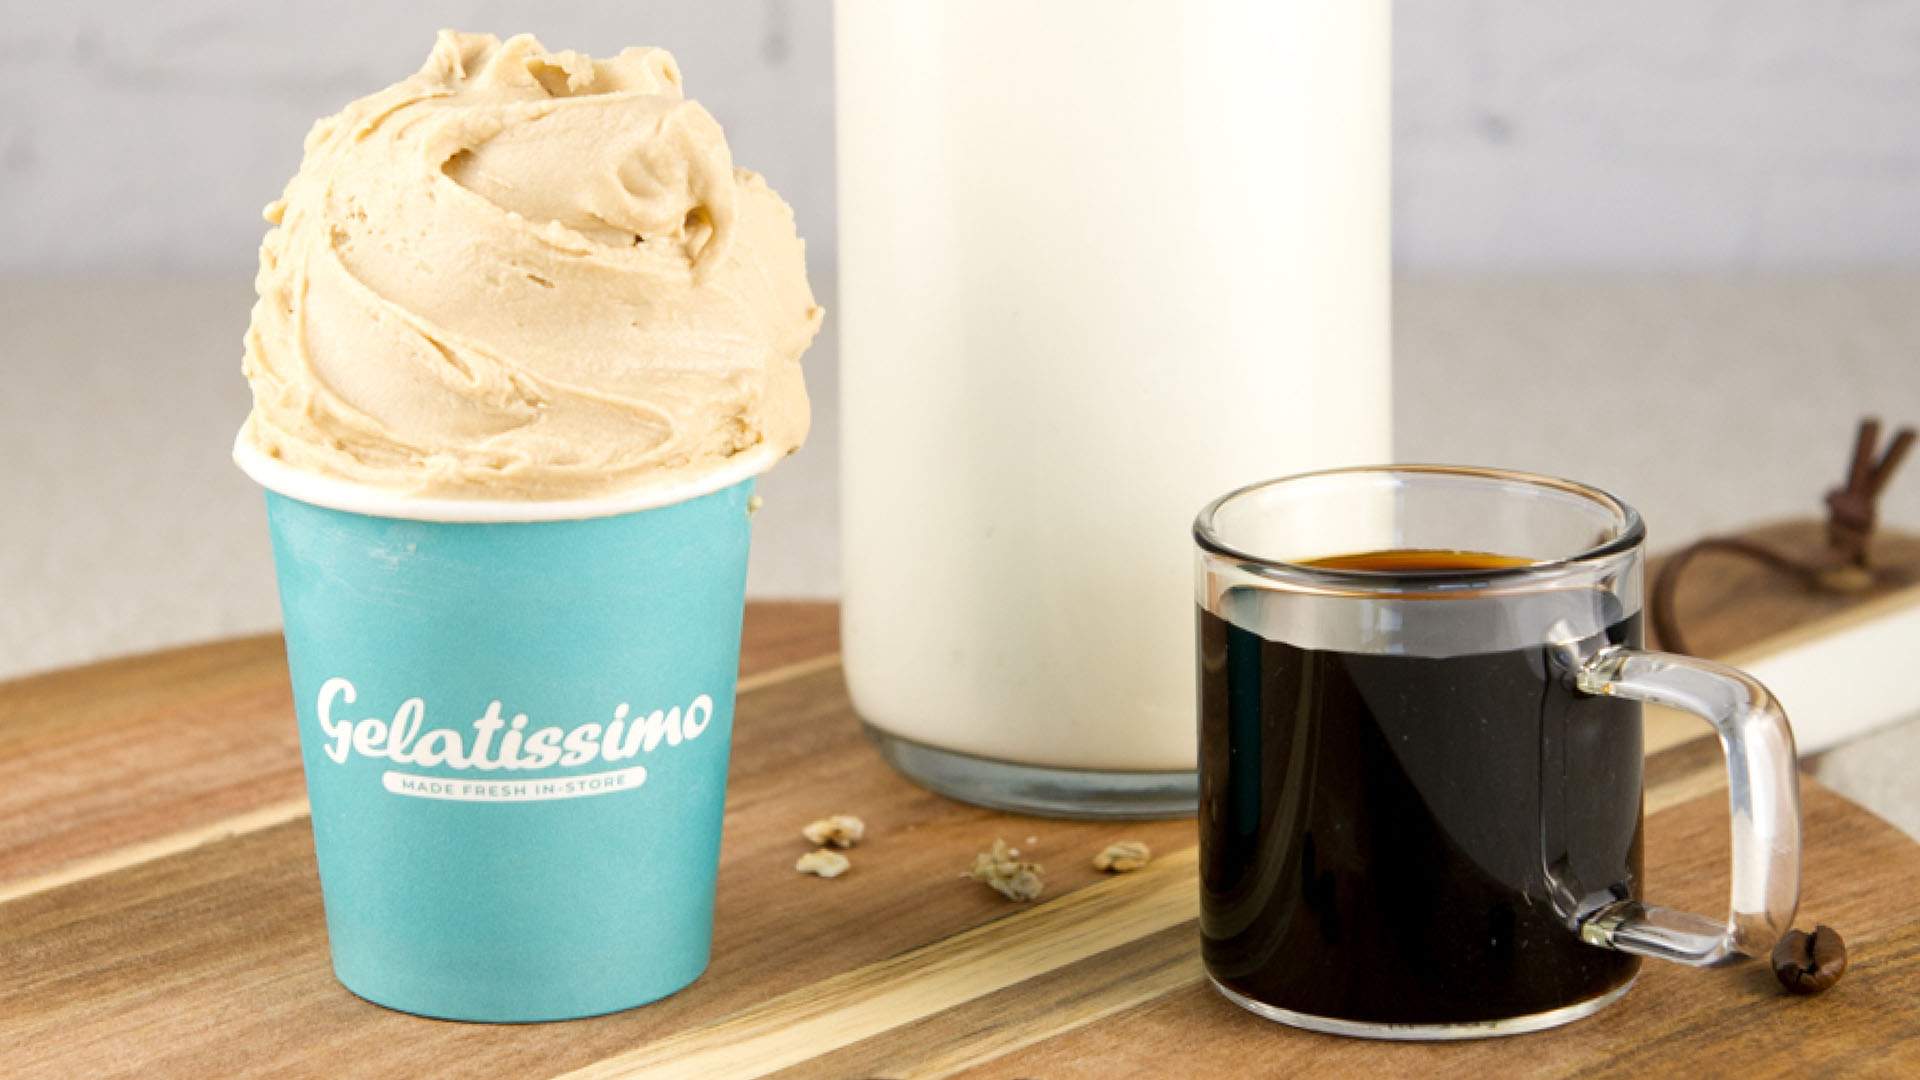 Gelatissimo Is Scooping Up Cold Brew Coffee-Flavoured Vegan Gelato Made with Oat Milk